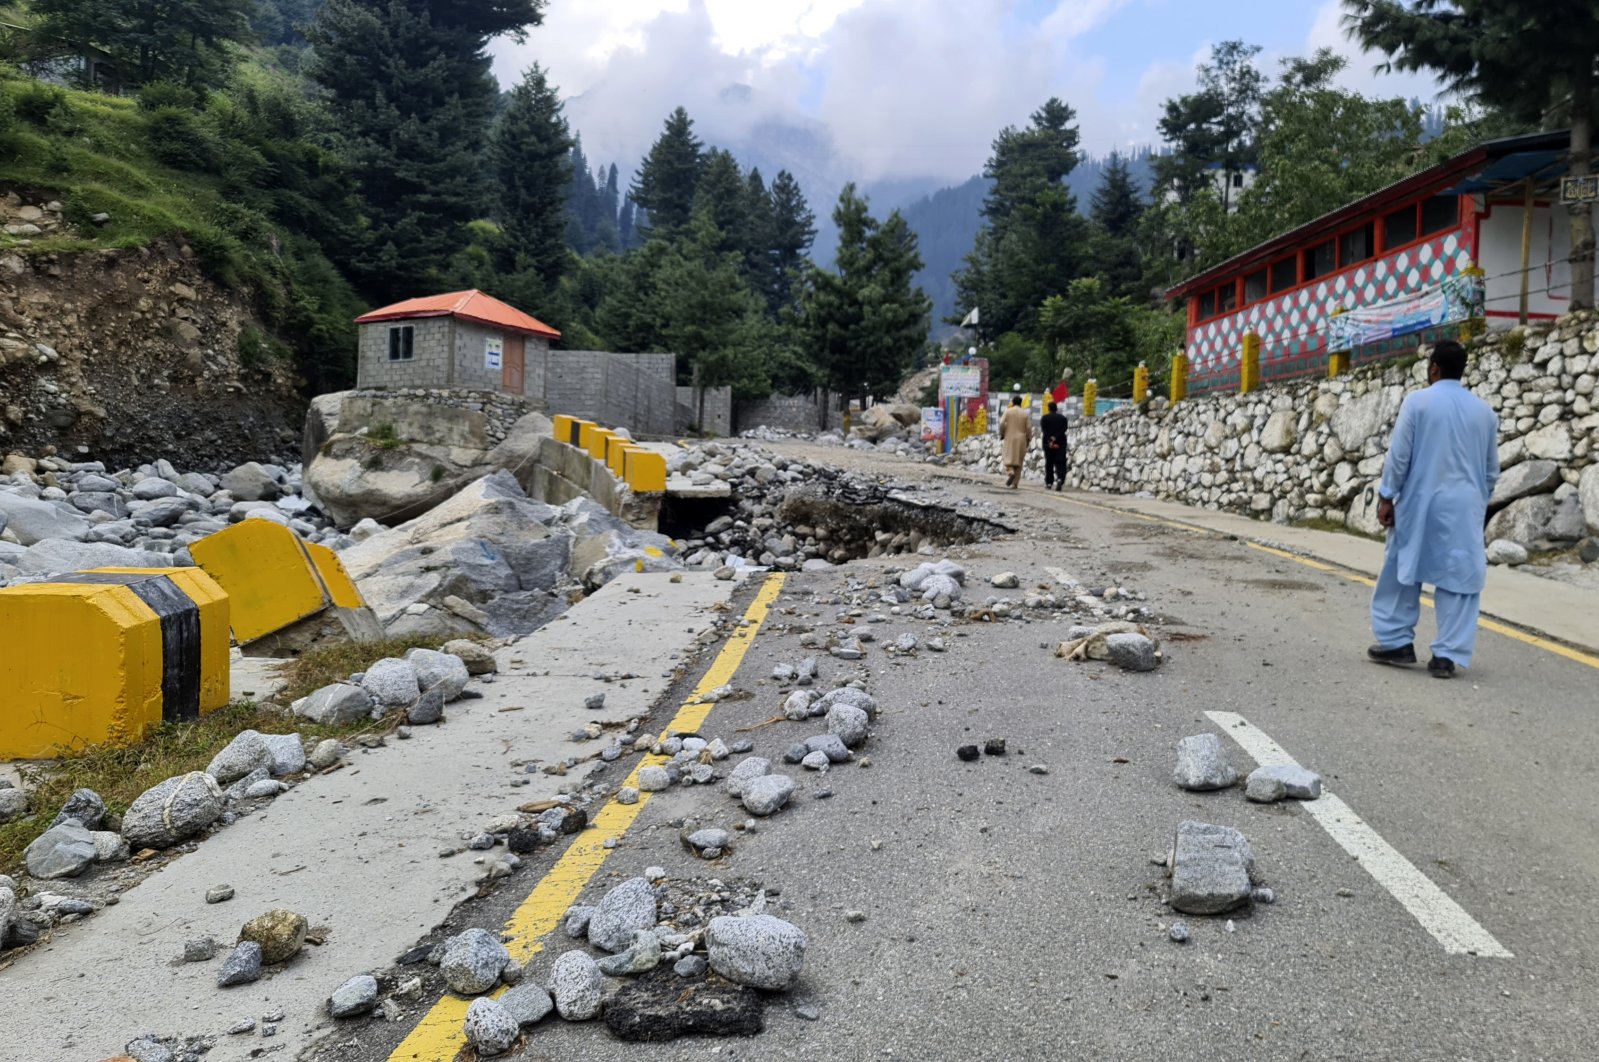 Local residents walk on a road destroyed by floodwaters in the Kalam Valley, northern Pakistan, Sept. 4, 2022. (AP Photo)